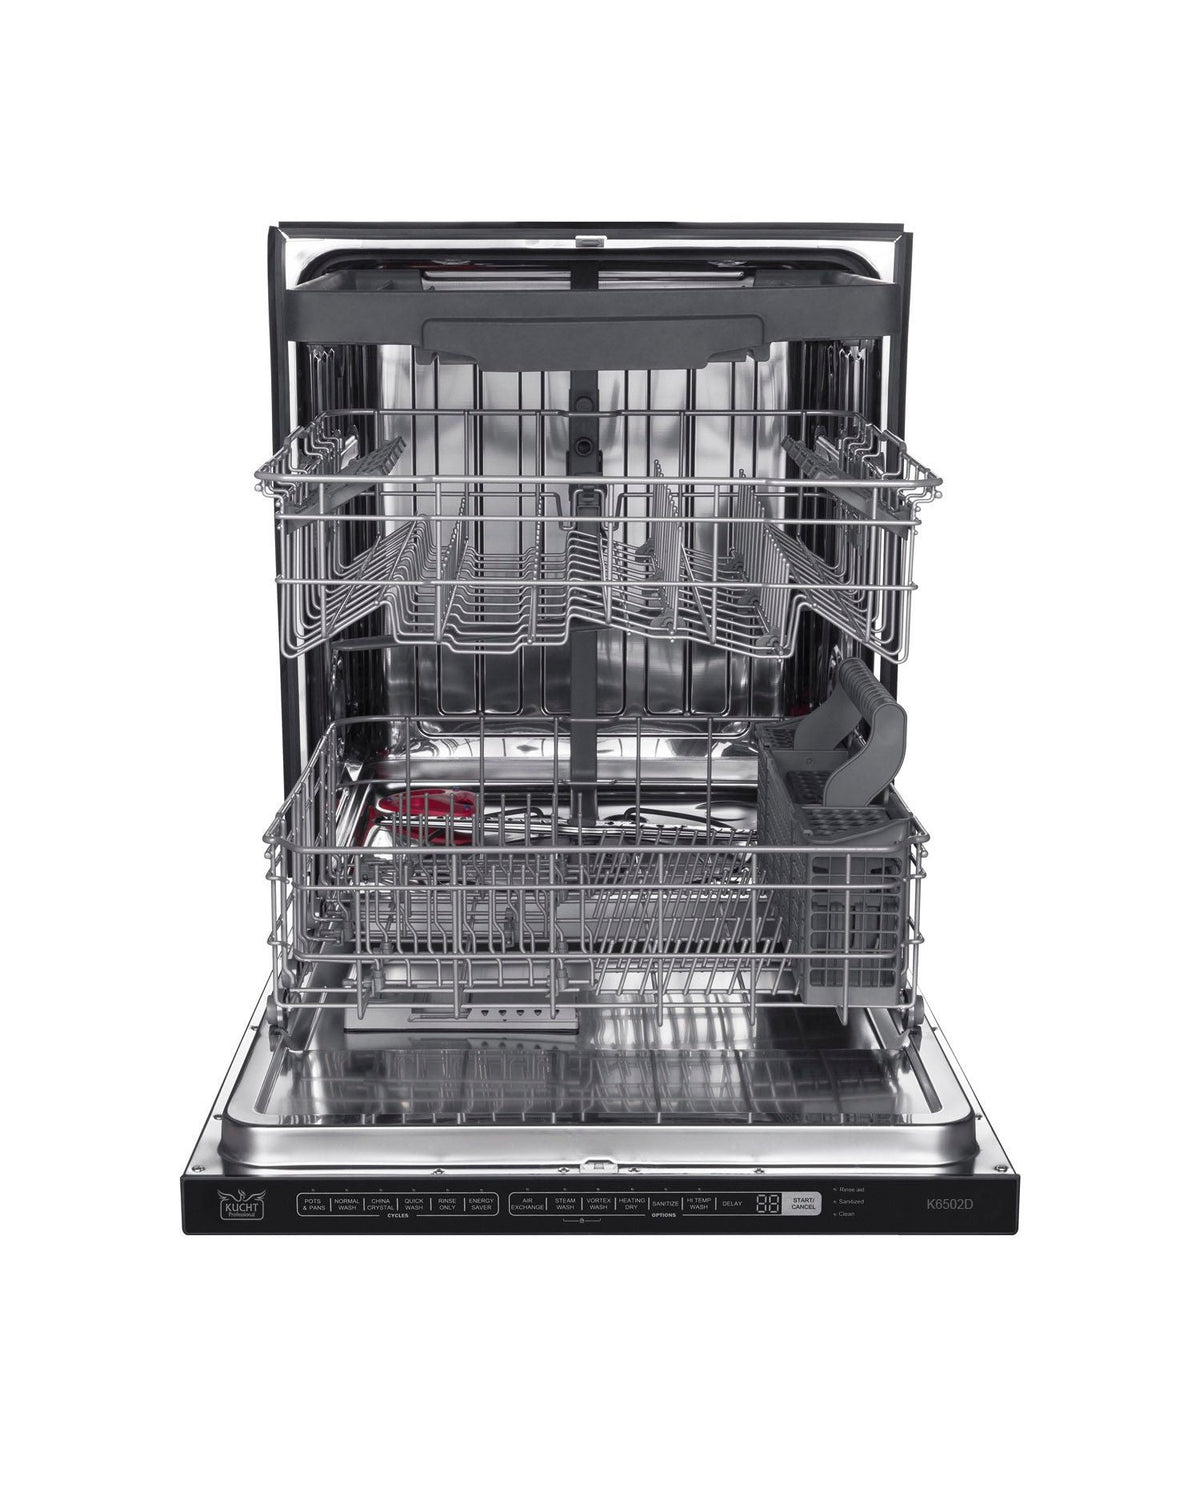 KUCHT K6502D 24″ Top Control Dishwasher in Stainless Steel with Stainless Steel Tub